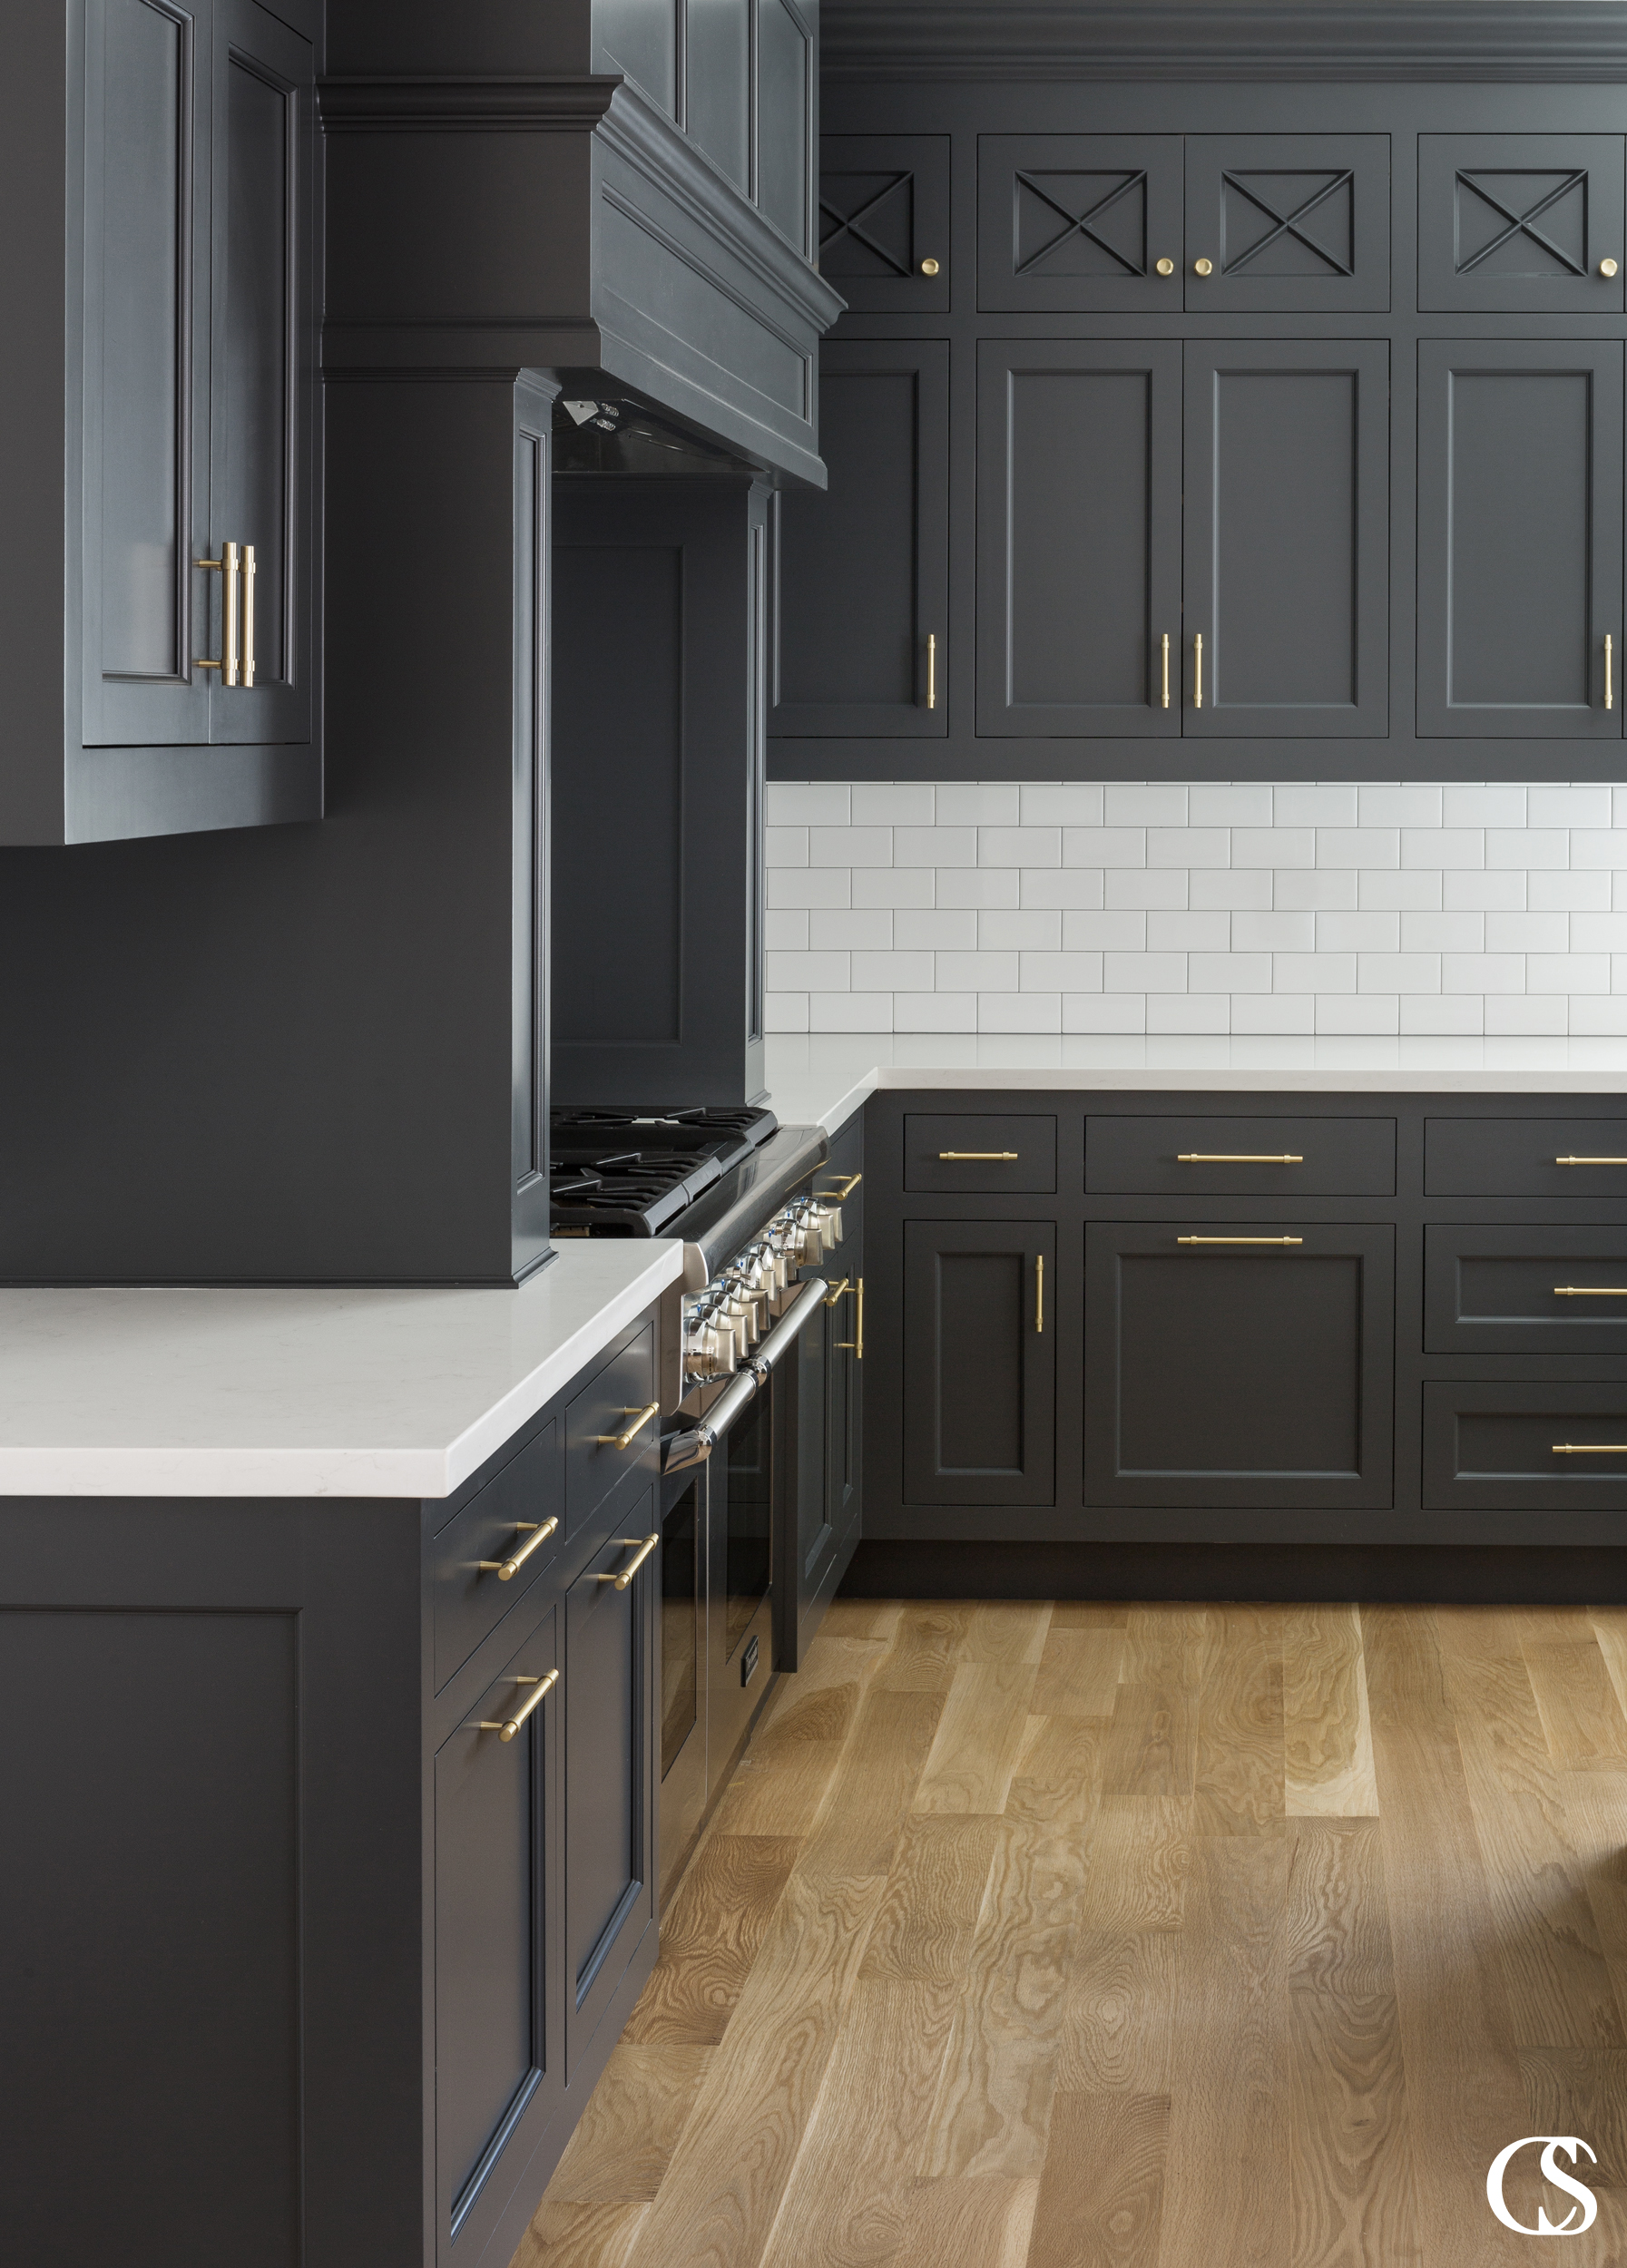 The combination of just the right black paint, perfectly mixed cupboard and drawer faces, and beautiful hardware make this some of the best custom cabinet design for the kitchen we've created.